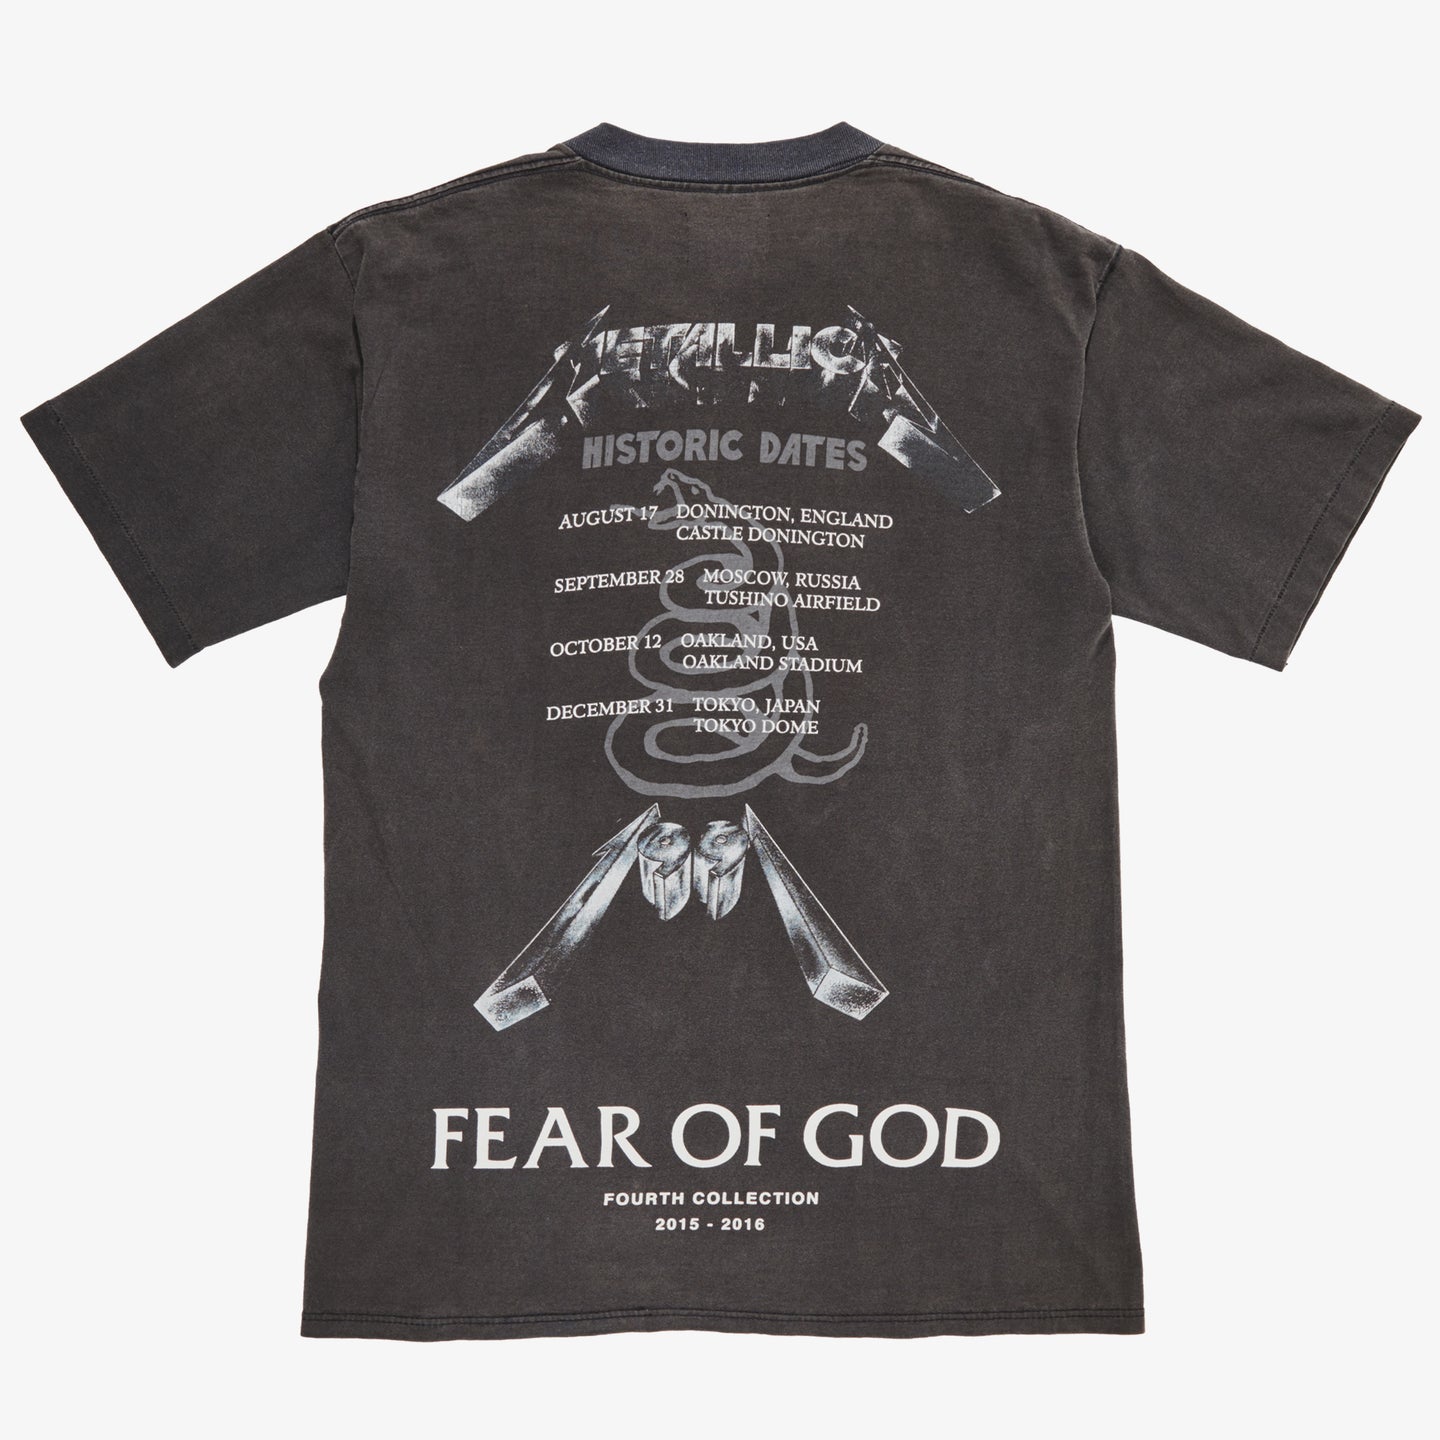 FEAR OF GOD 4TH COLLECTION METALLICA 1991 HISTORIC DATES TEE – OBTAIND